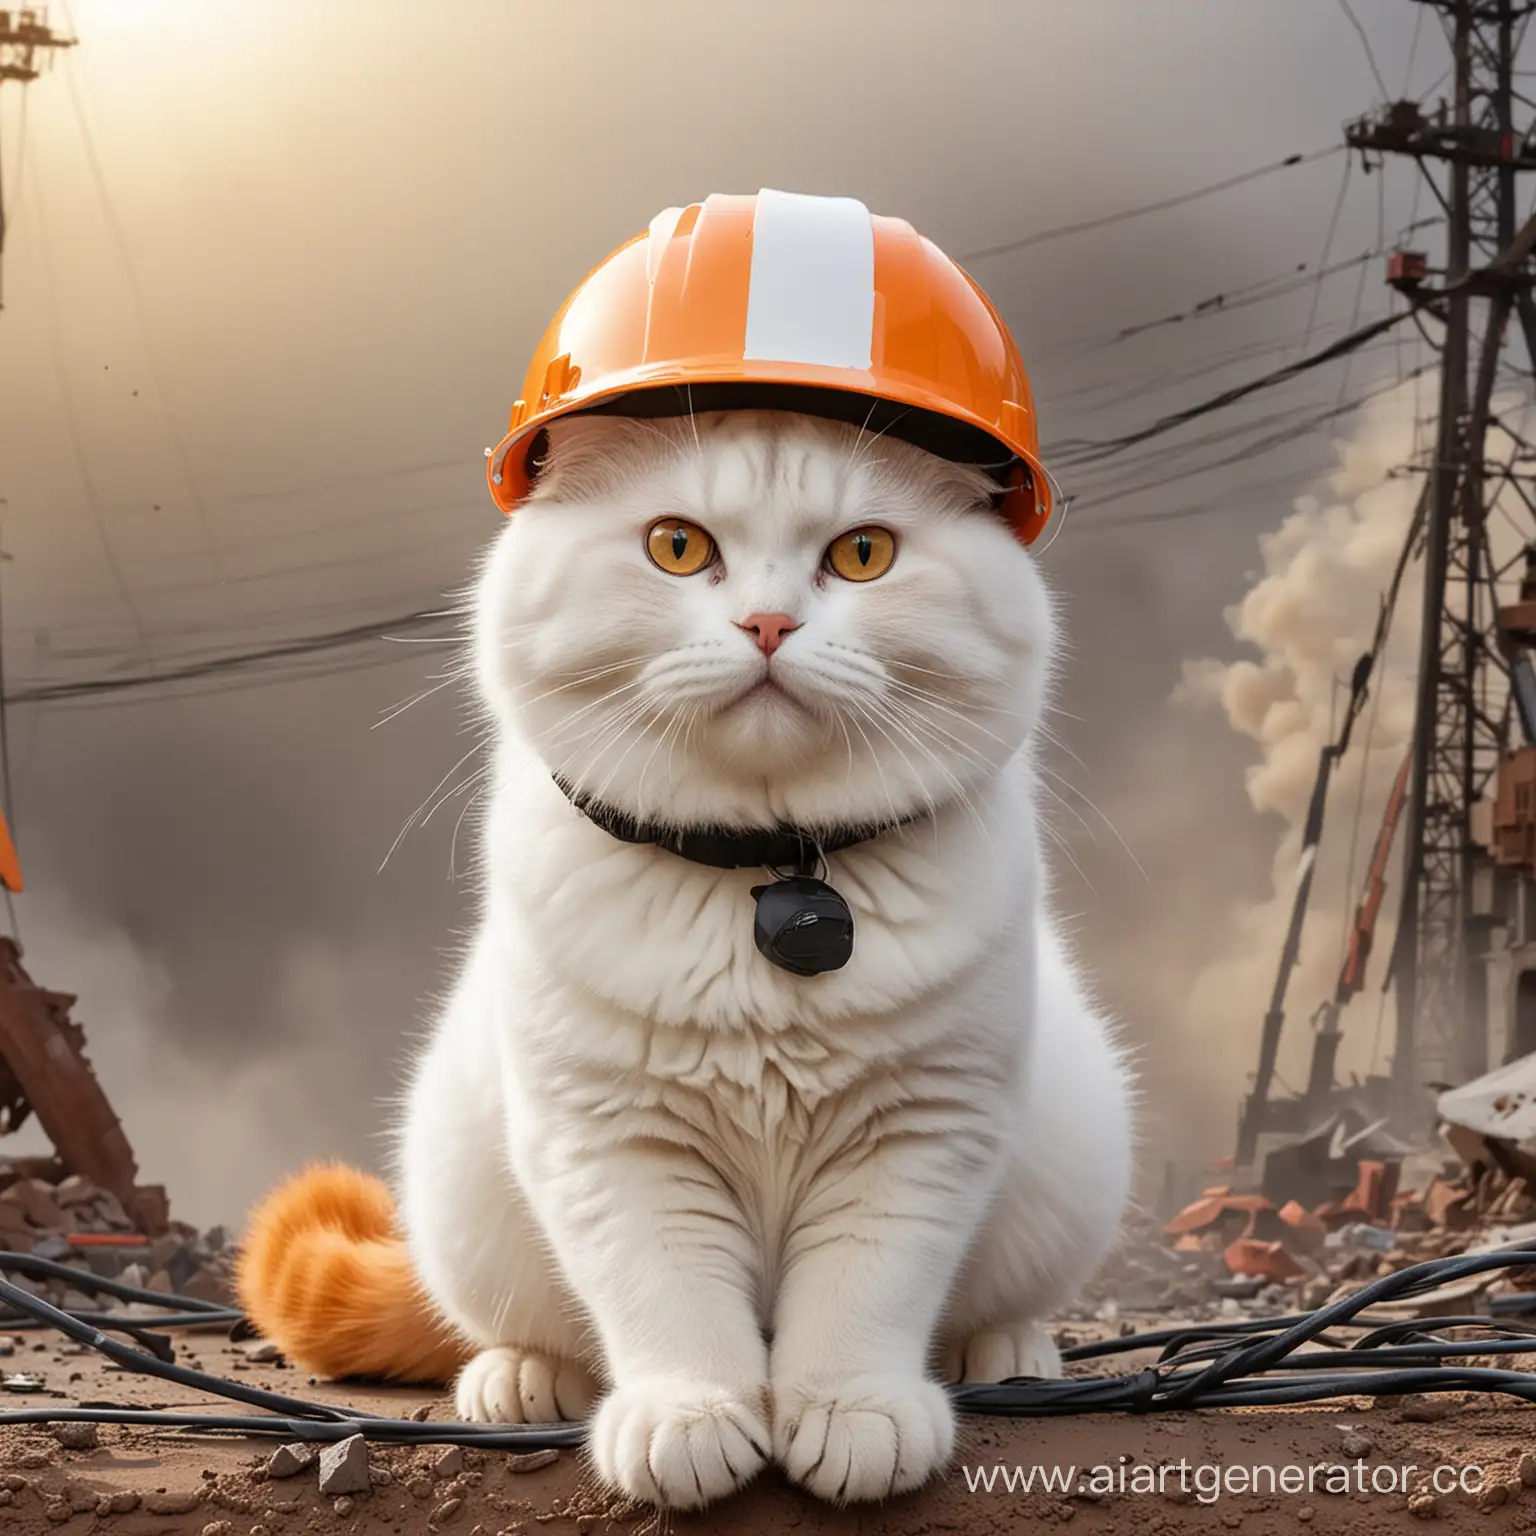 Adorable-Cat-in-Safety-Gear-Perched-on-Wires-Amidst-Explosive-Scene